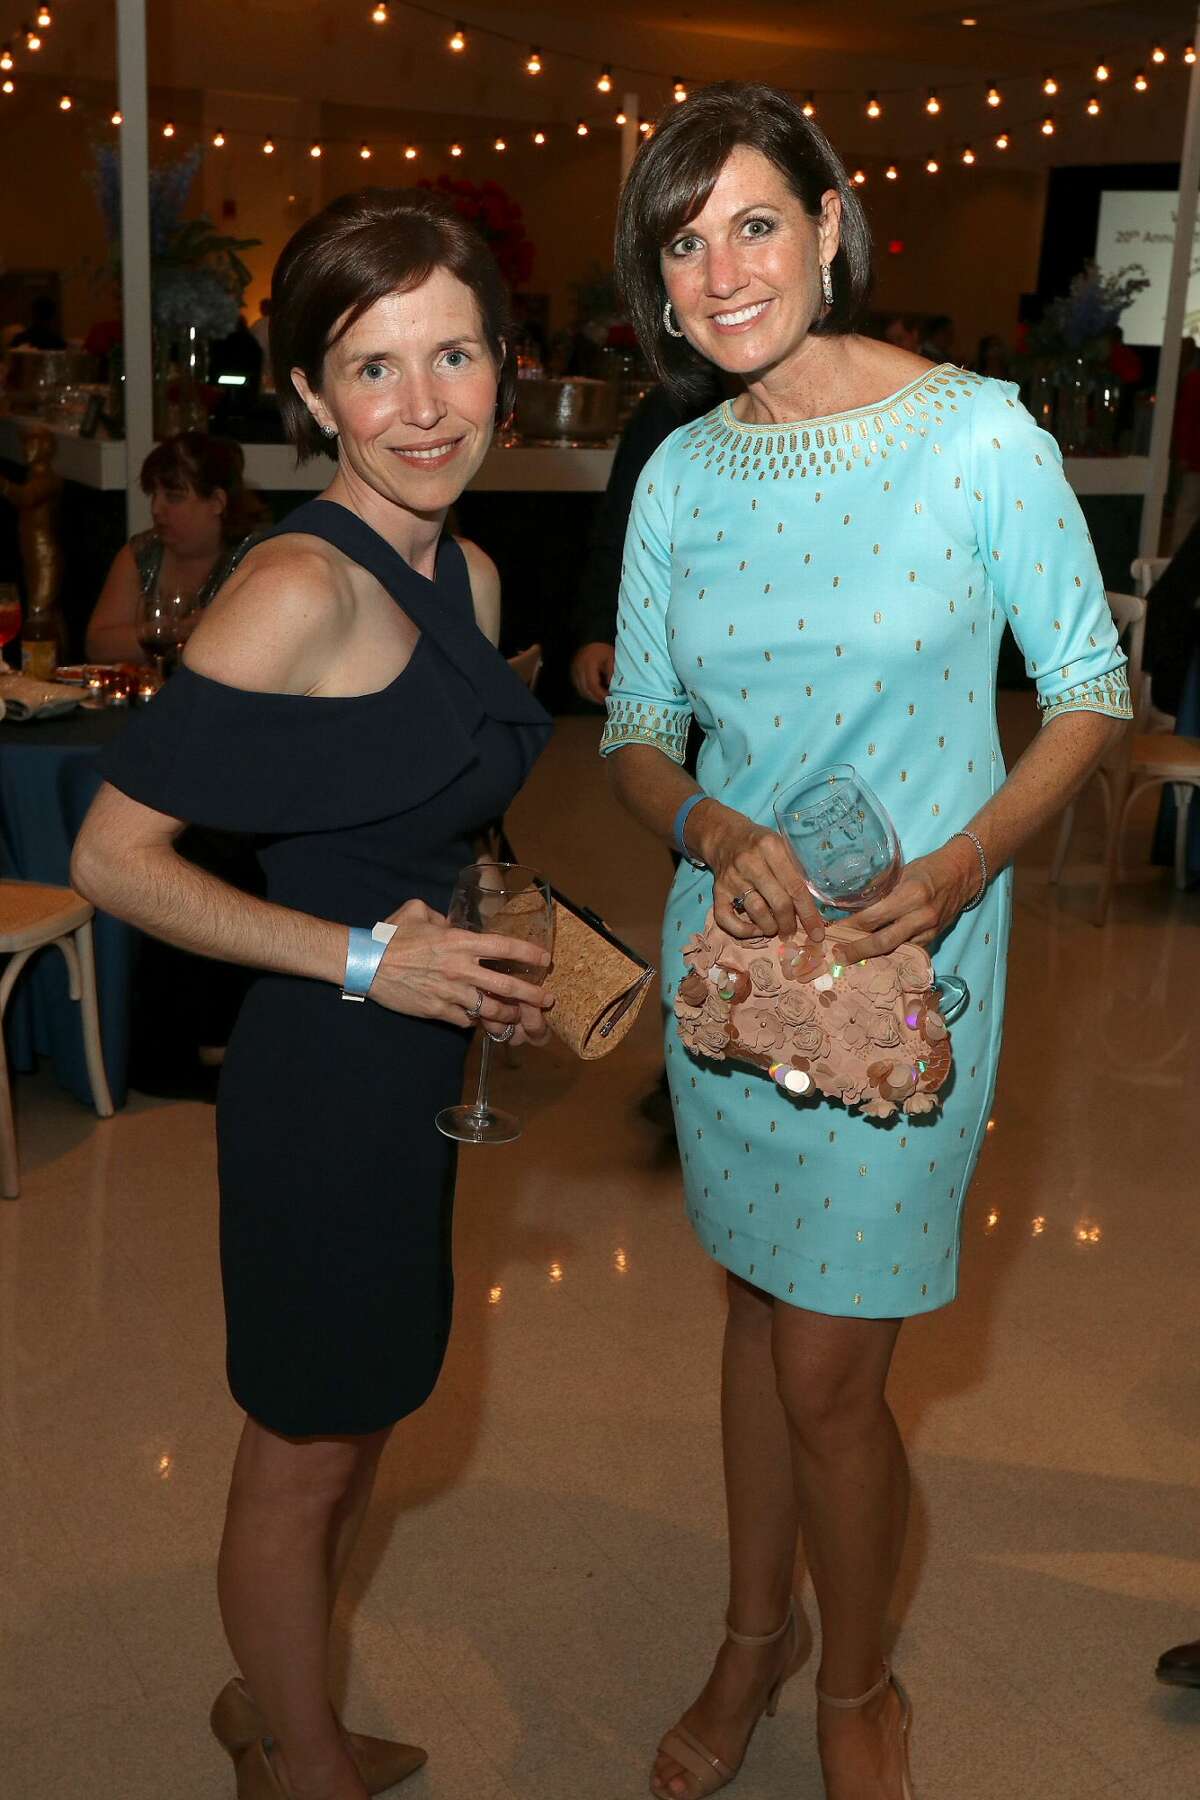 Were you Seen at the 20th Annual Travers Wine Tasting, a benefit for Senior Services of Albany, held at the Saratoga Springs City Center in Saratoga Springs on Friday, Aug. 24, 2018?